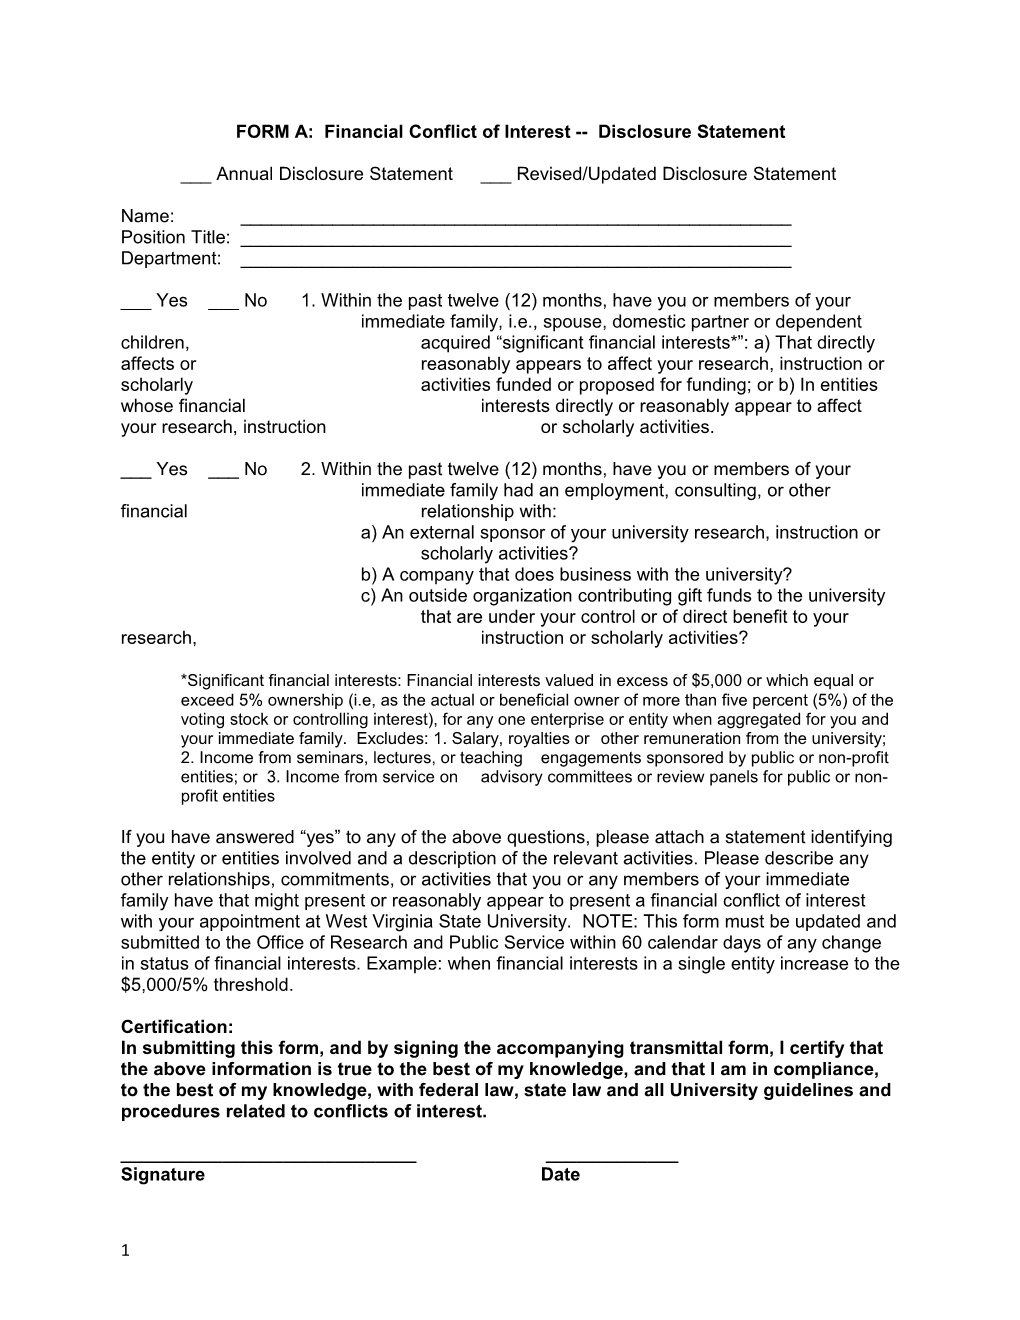 FORM A: Financial Conflict of Interest Disclosure Statement